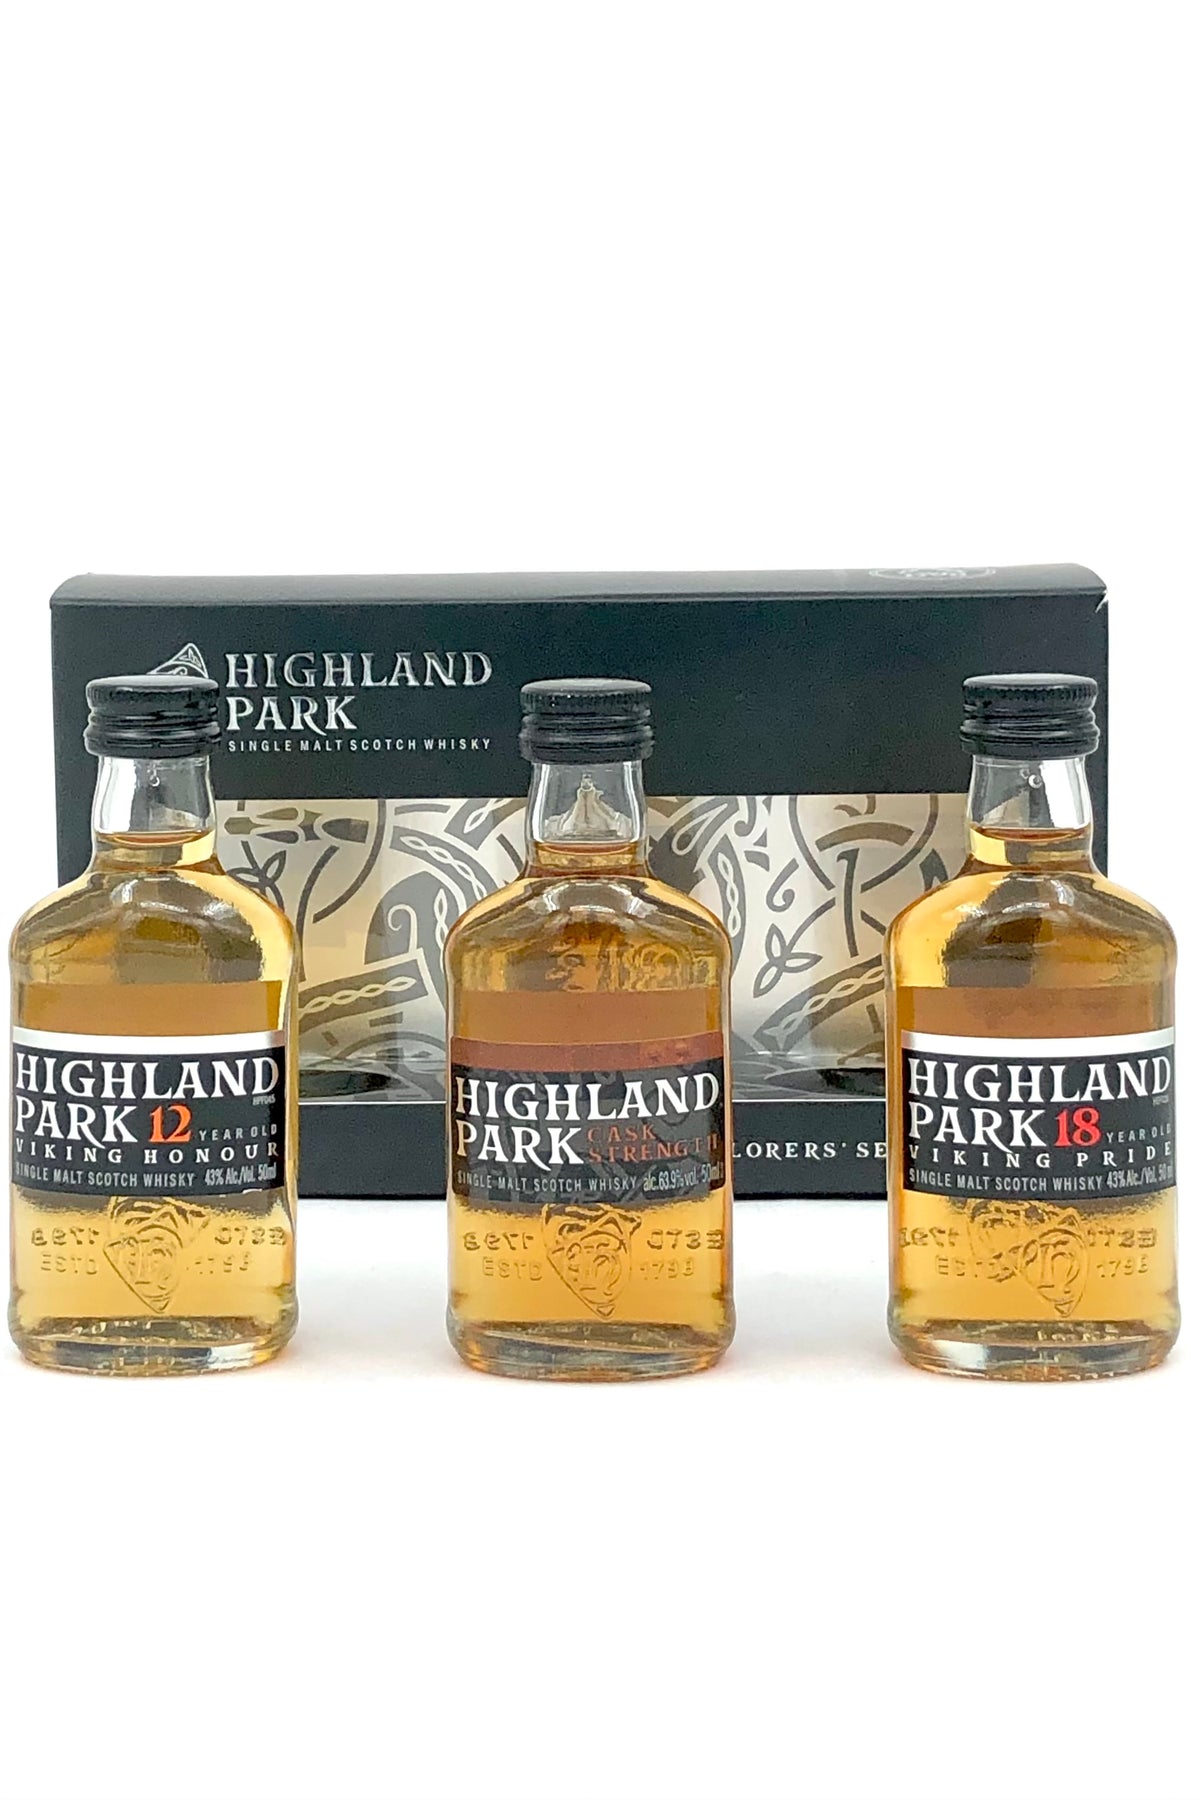 Highland Park &quot;Explorers&#39; Selection&quot; 12 Year, Cask Strength, 18 Year, Scotch Whisky 3 x 50 ml